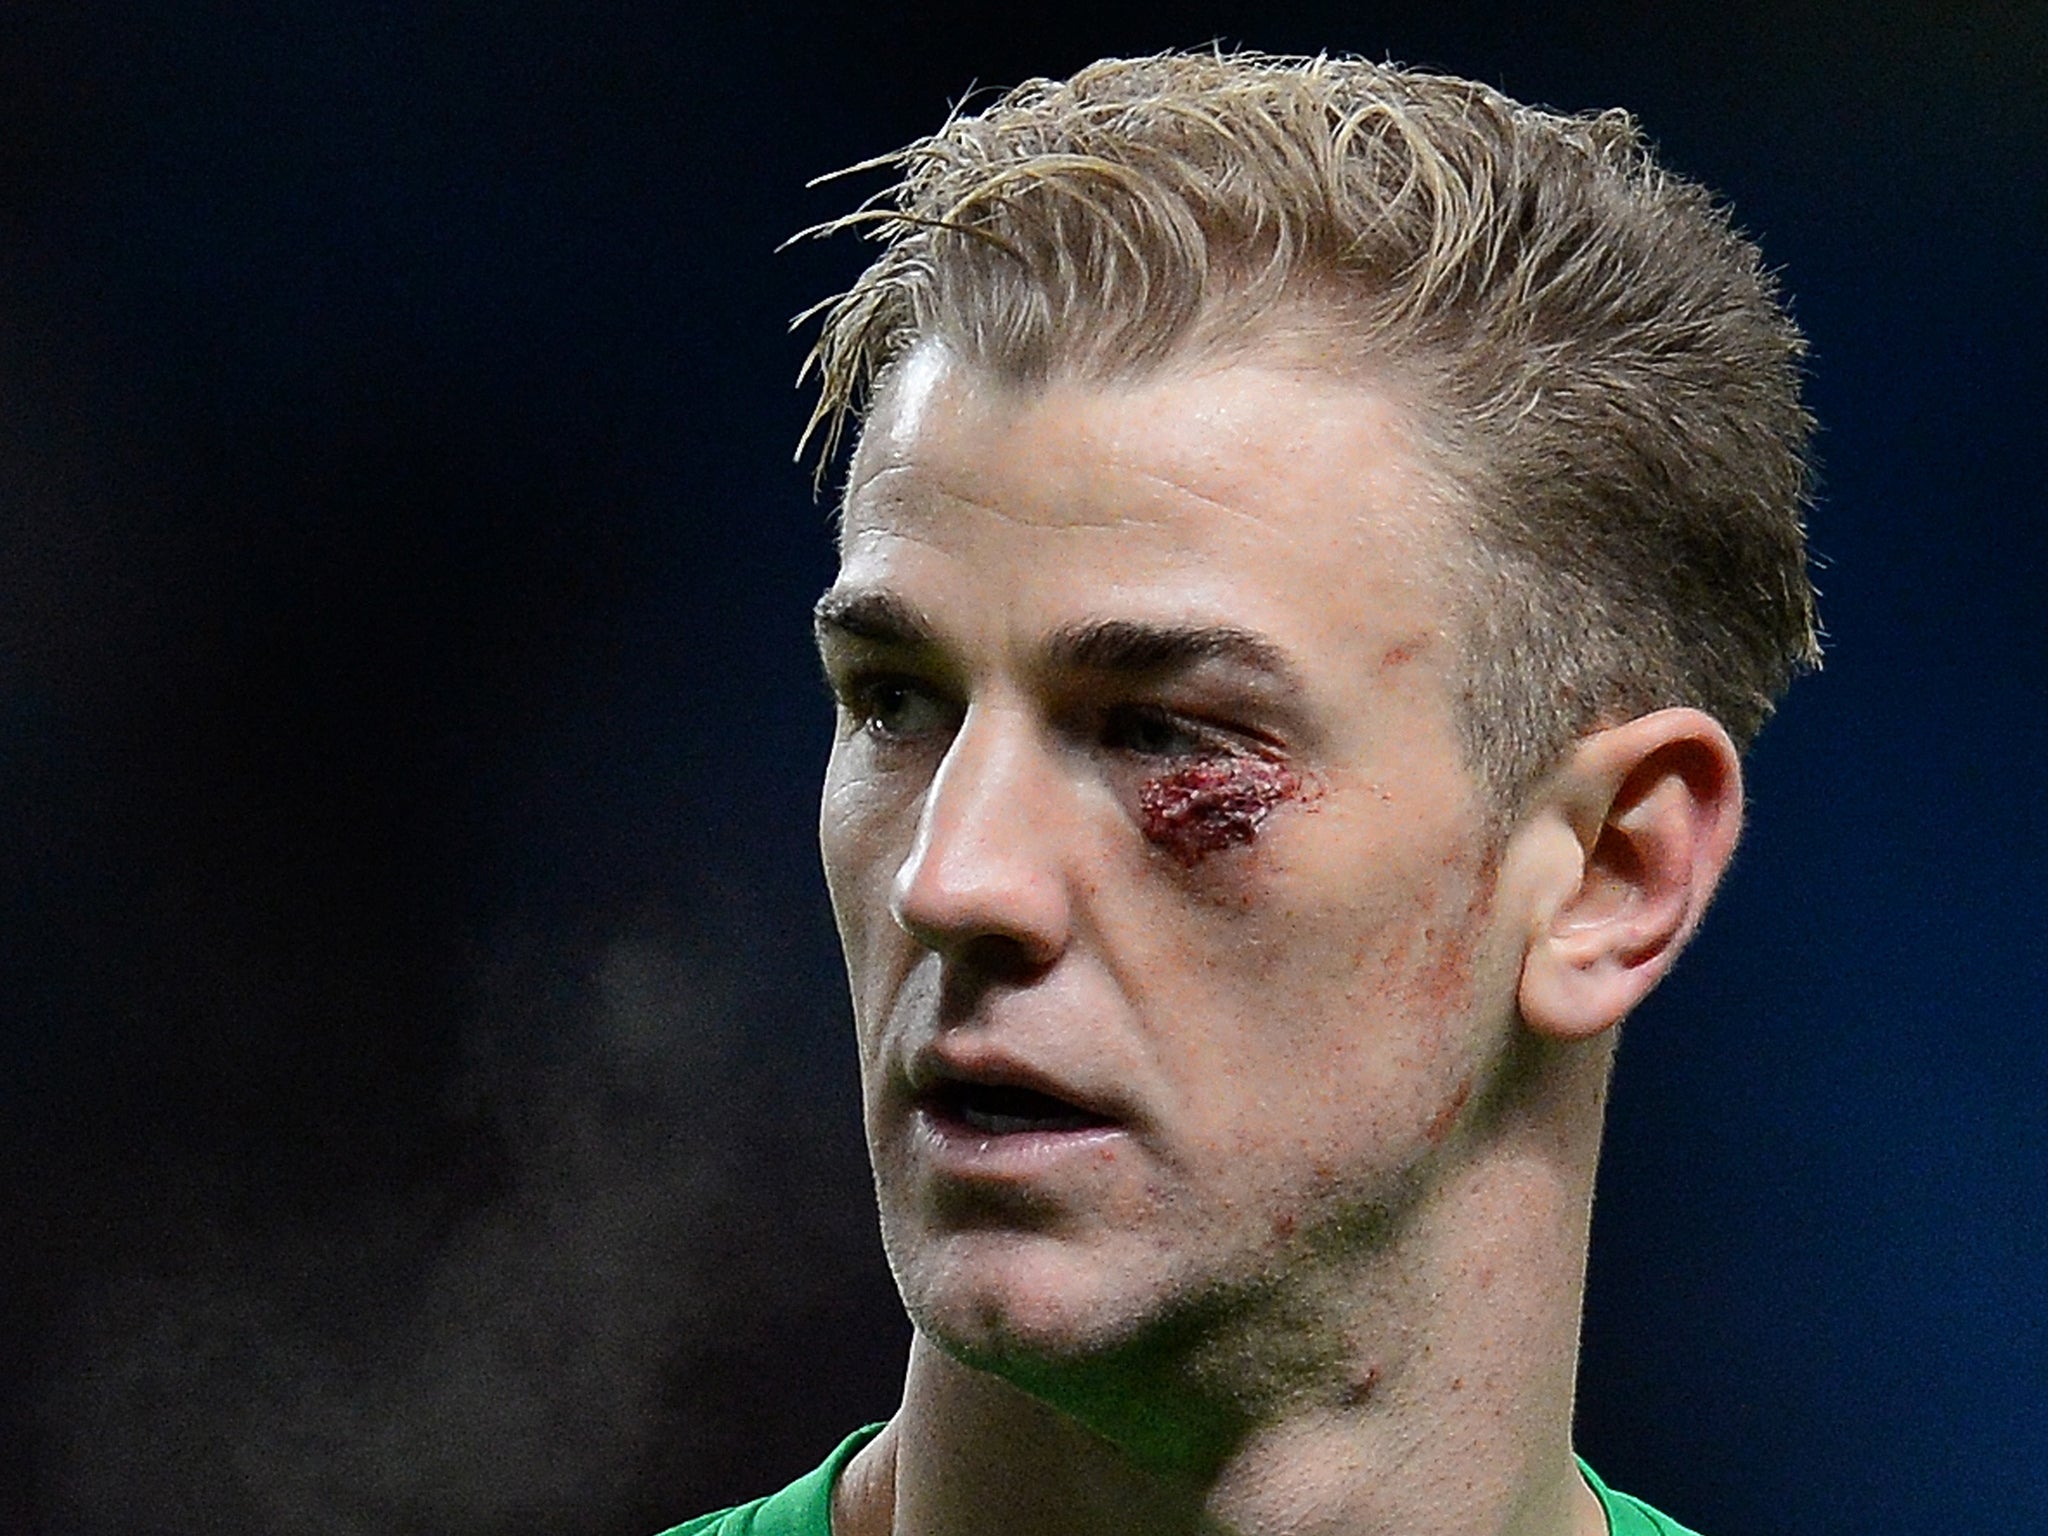 Joe Hart suffered a nasty looking cut which required five stitches in Manchester City's 1-0 victory over Crystal Palace